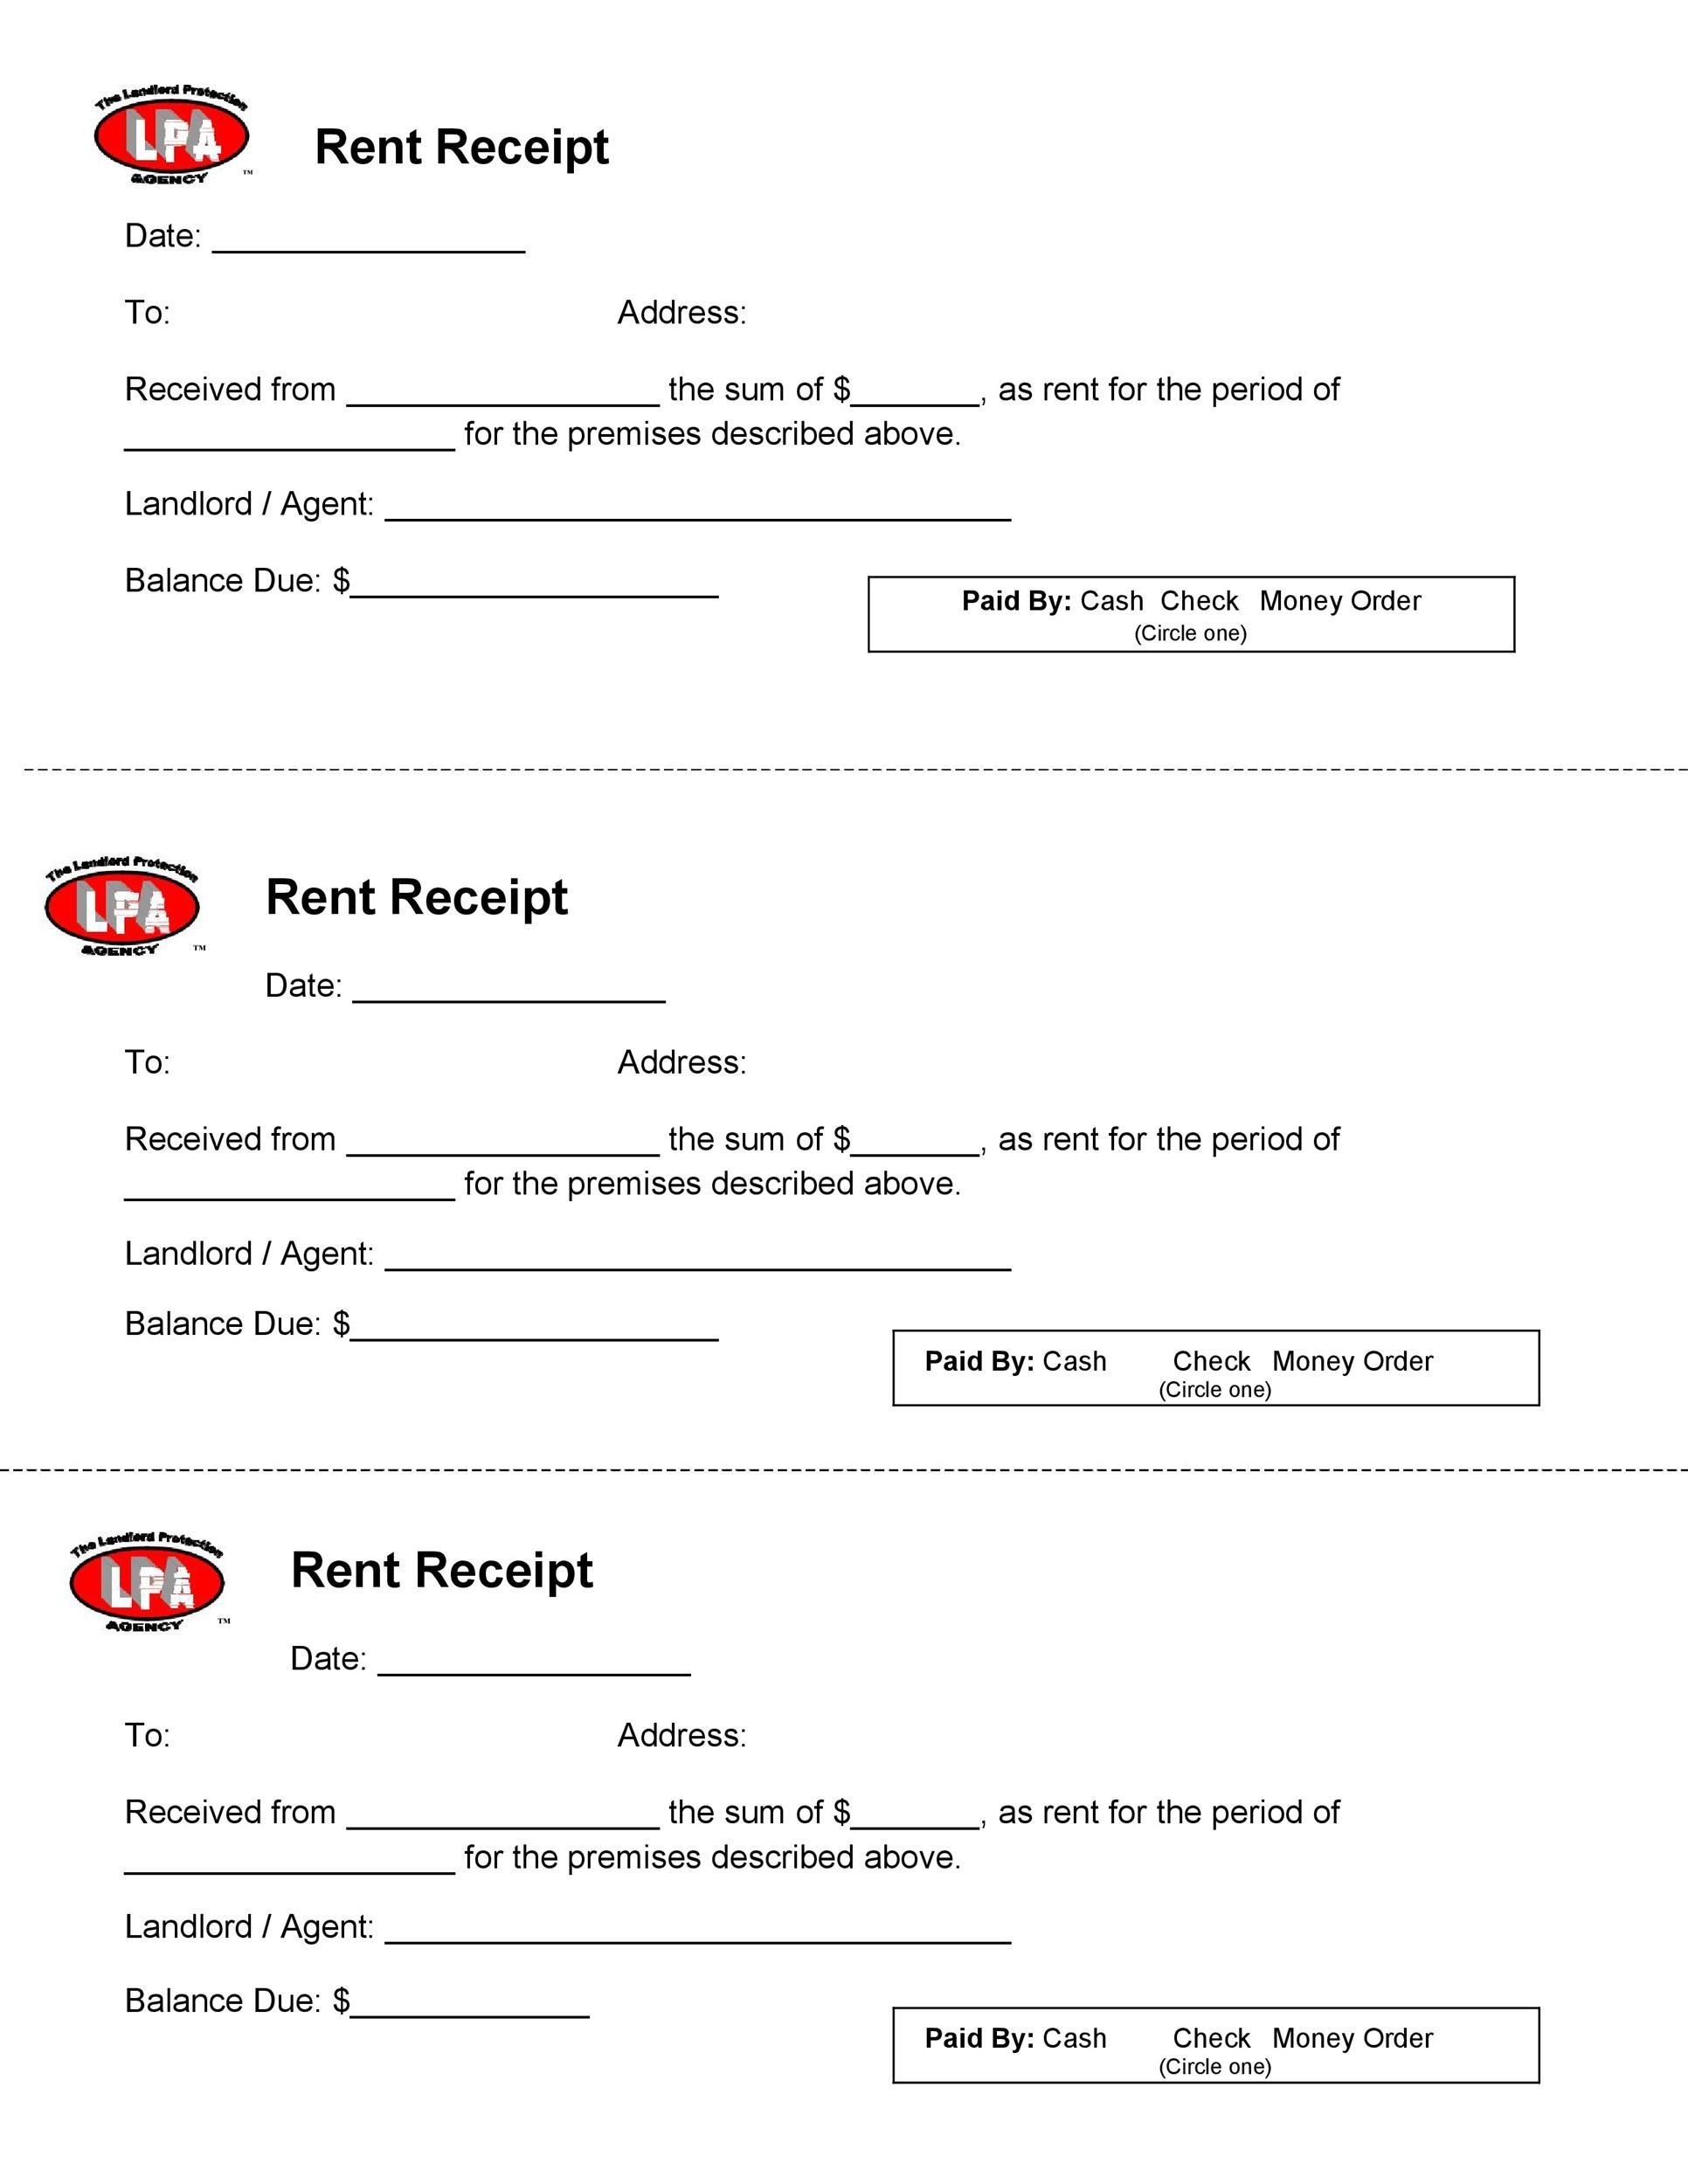 rent-receipt-pdf-download-india-tutore-org-master-of-documents